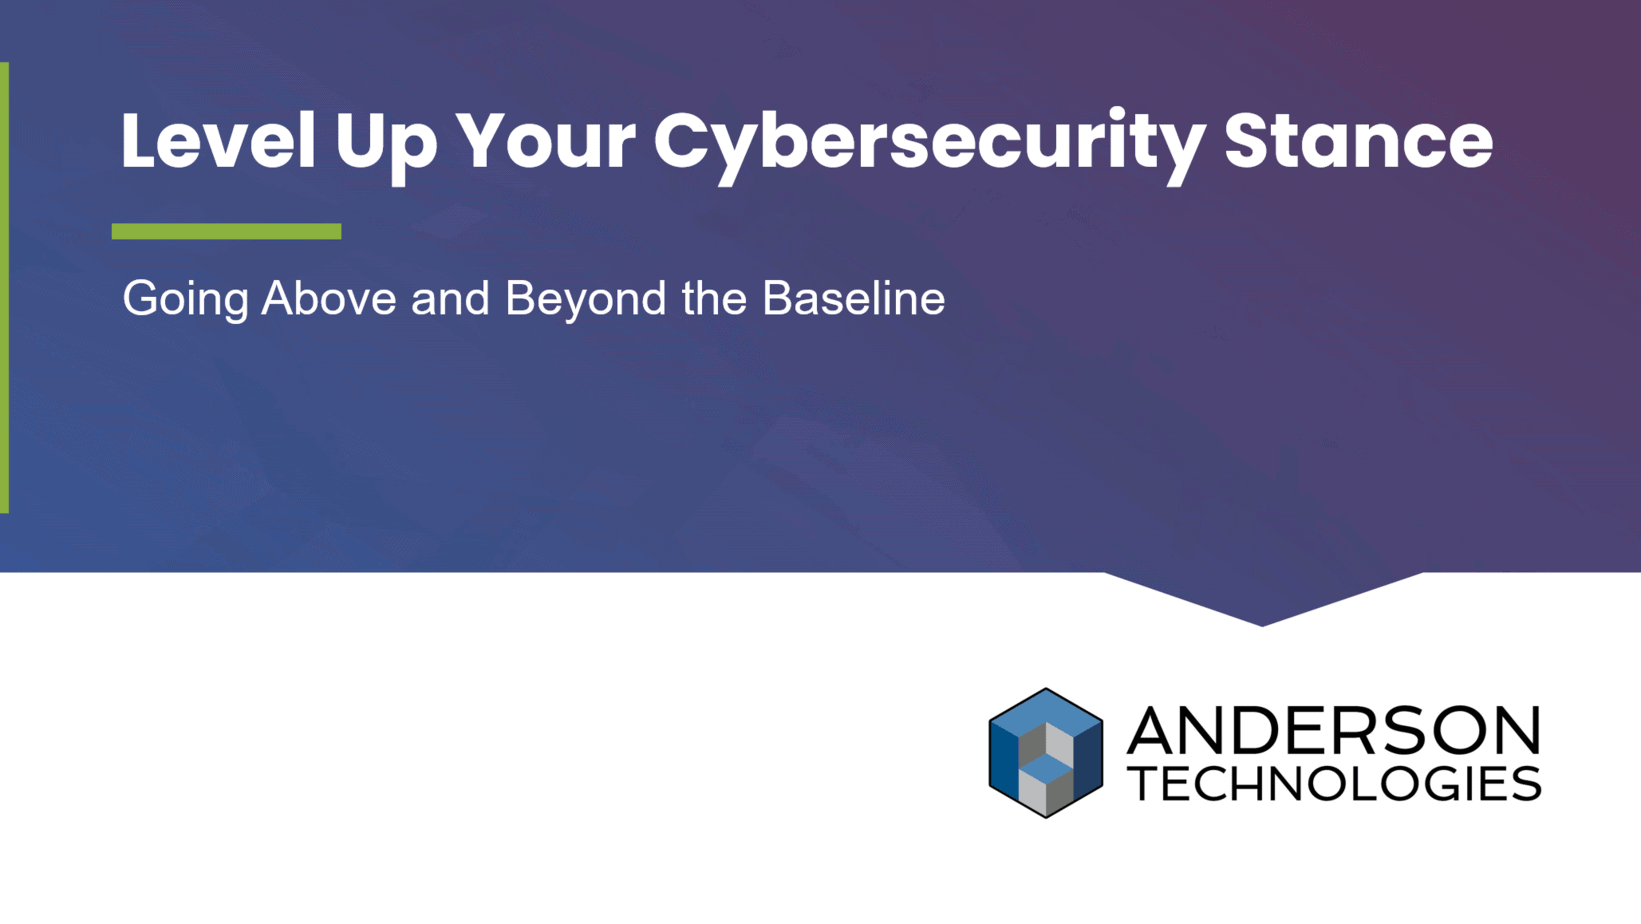 Level Up Your Cybersecurity Stance